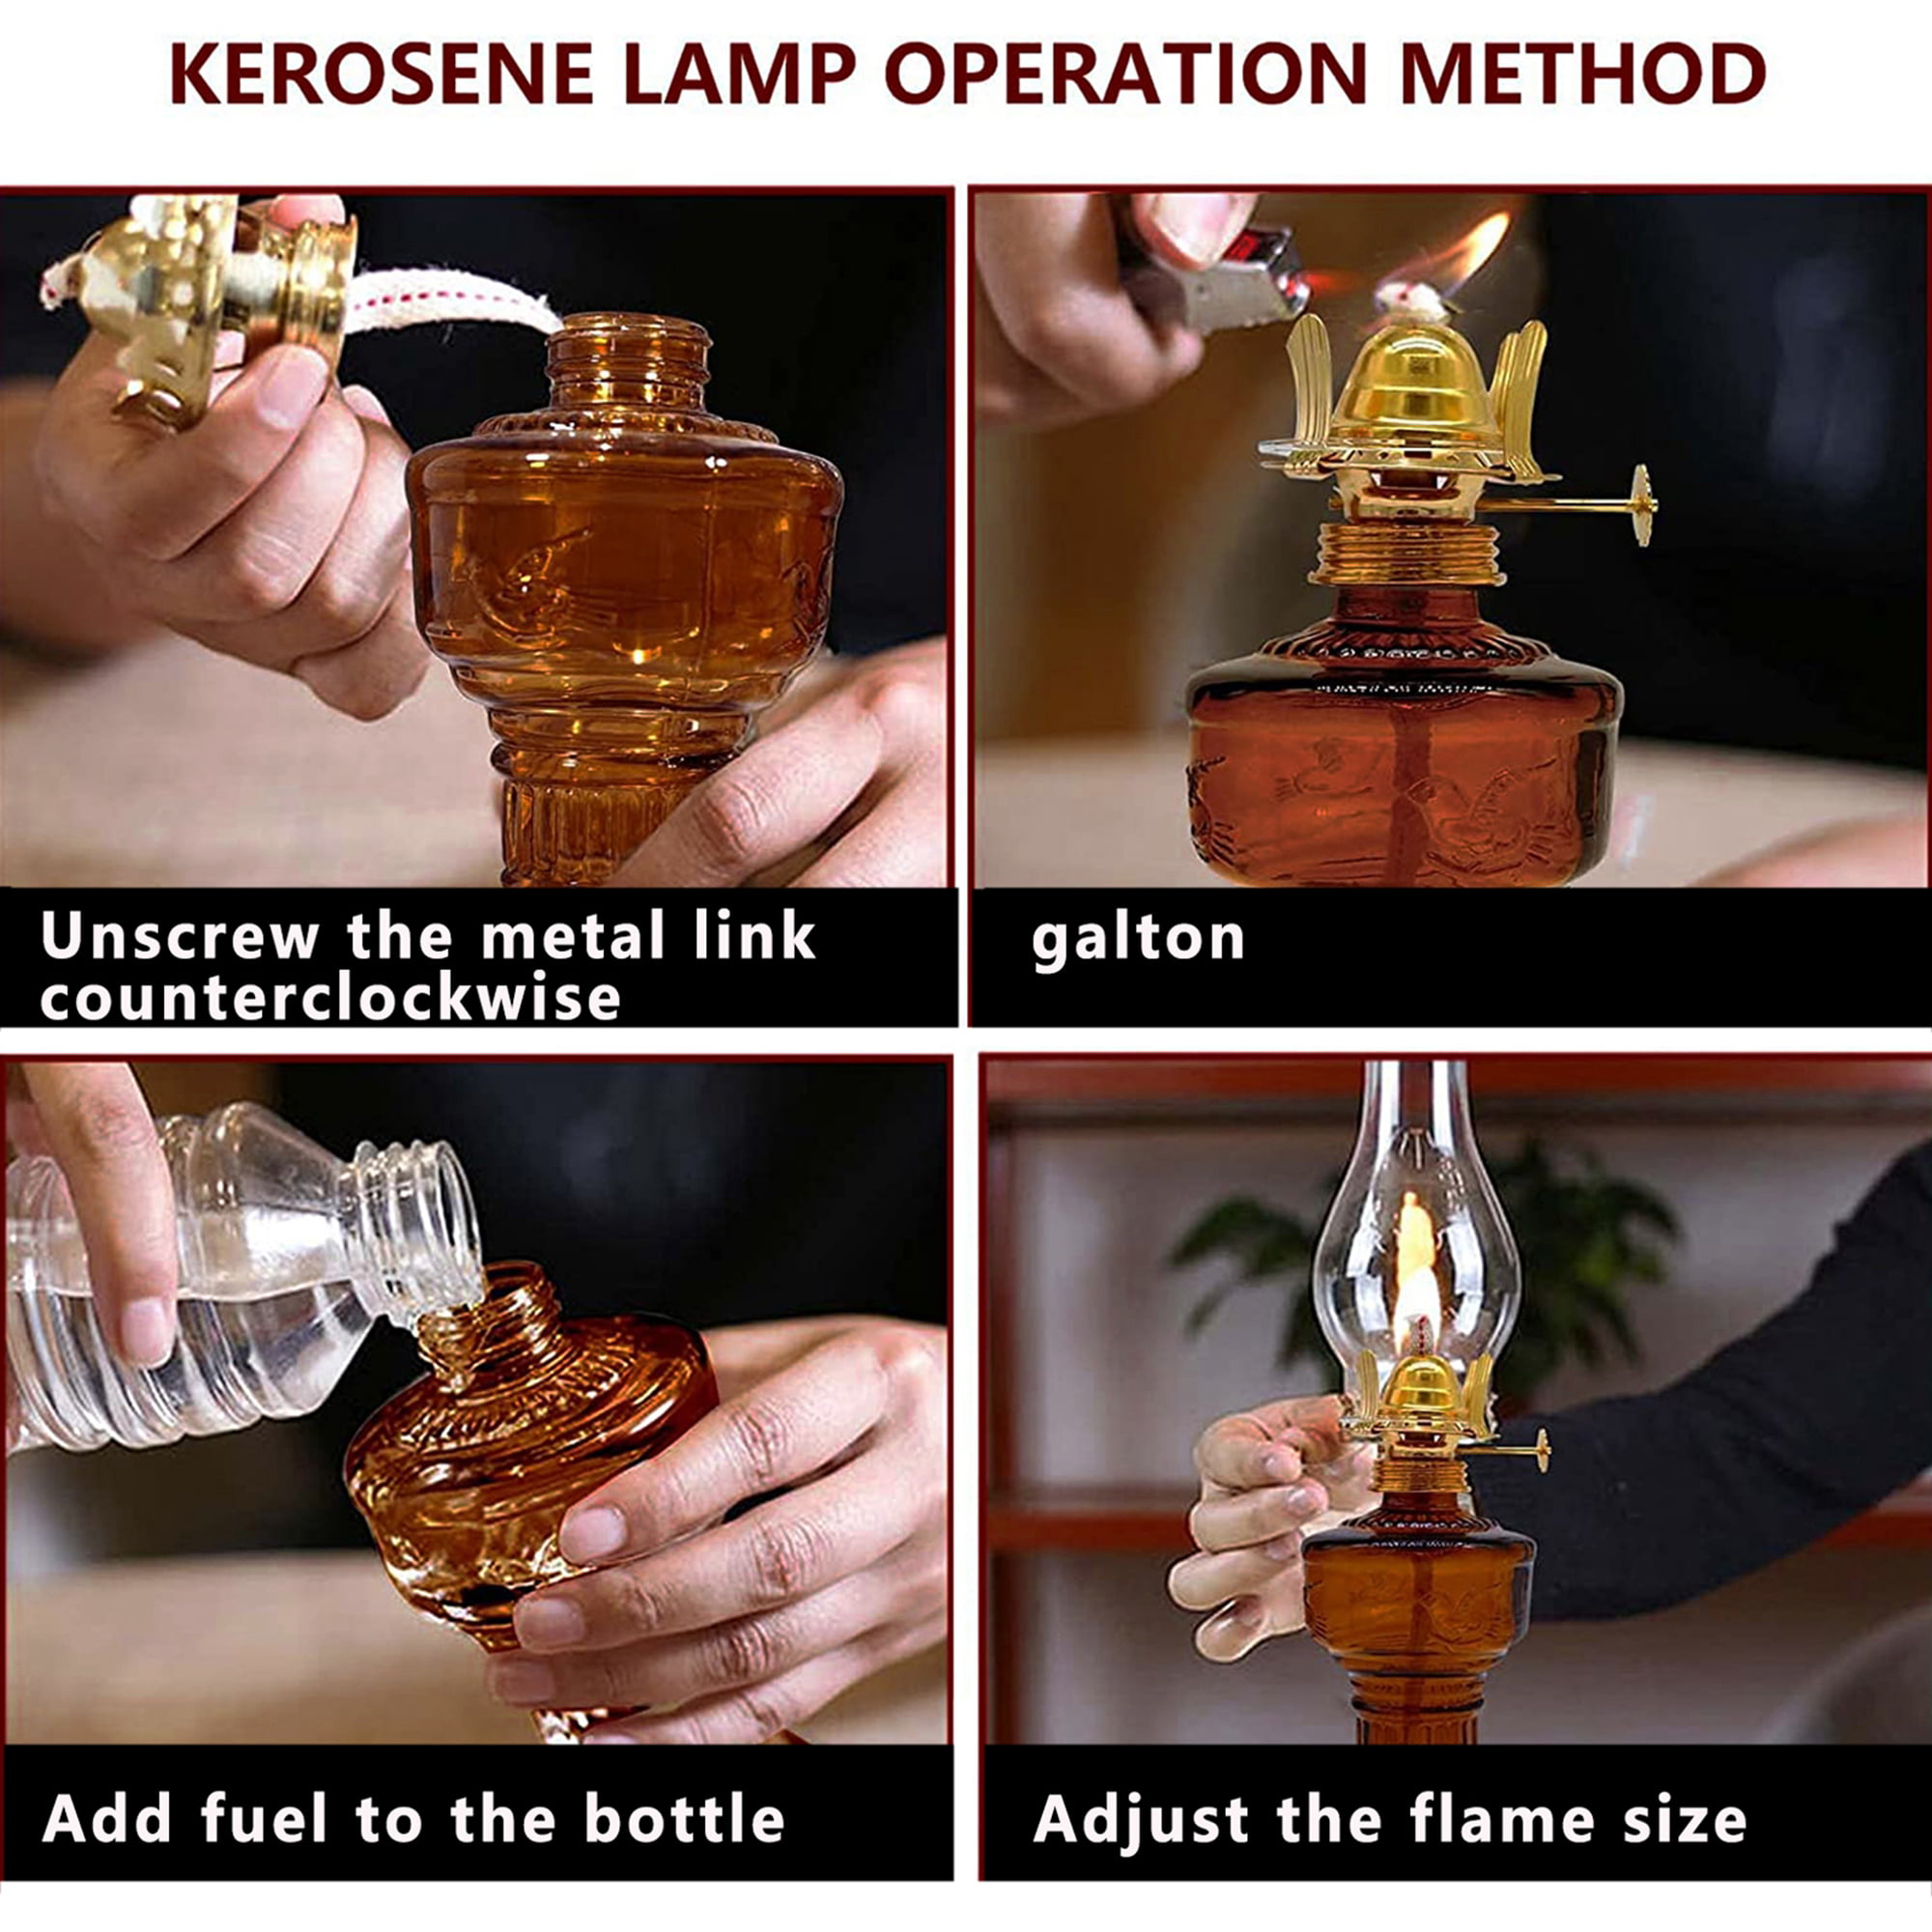 4 Pieces Oil Lamps, Vintage Glass Kerosene Lamp Oil Lantern, Classic  Chamber Hurricane Lamps Decorative Oil Lamp for Indoor Use Home Tabletop  Decor